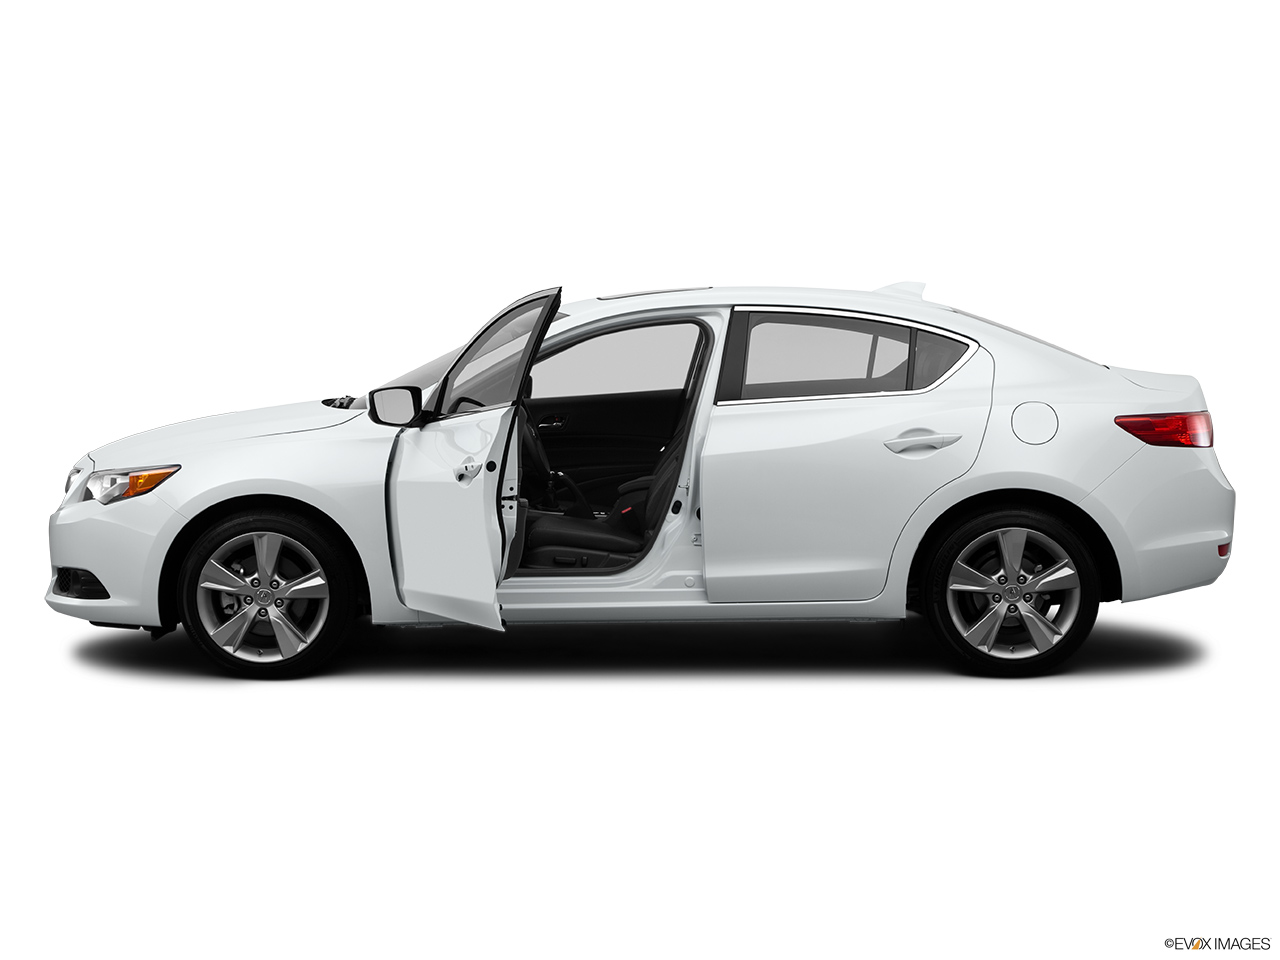 2015 Acura ILX 6-Speed Manual Driver's side profile with drivers side door open. 